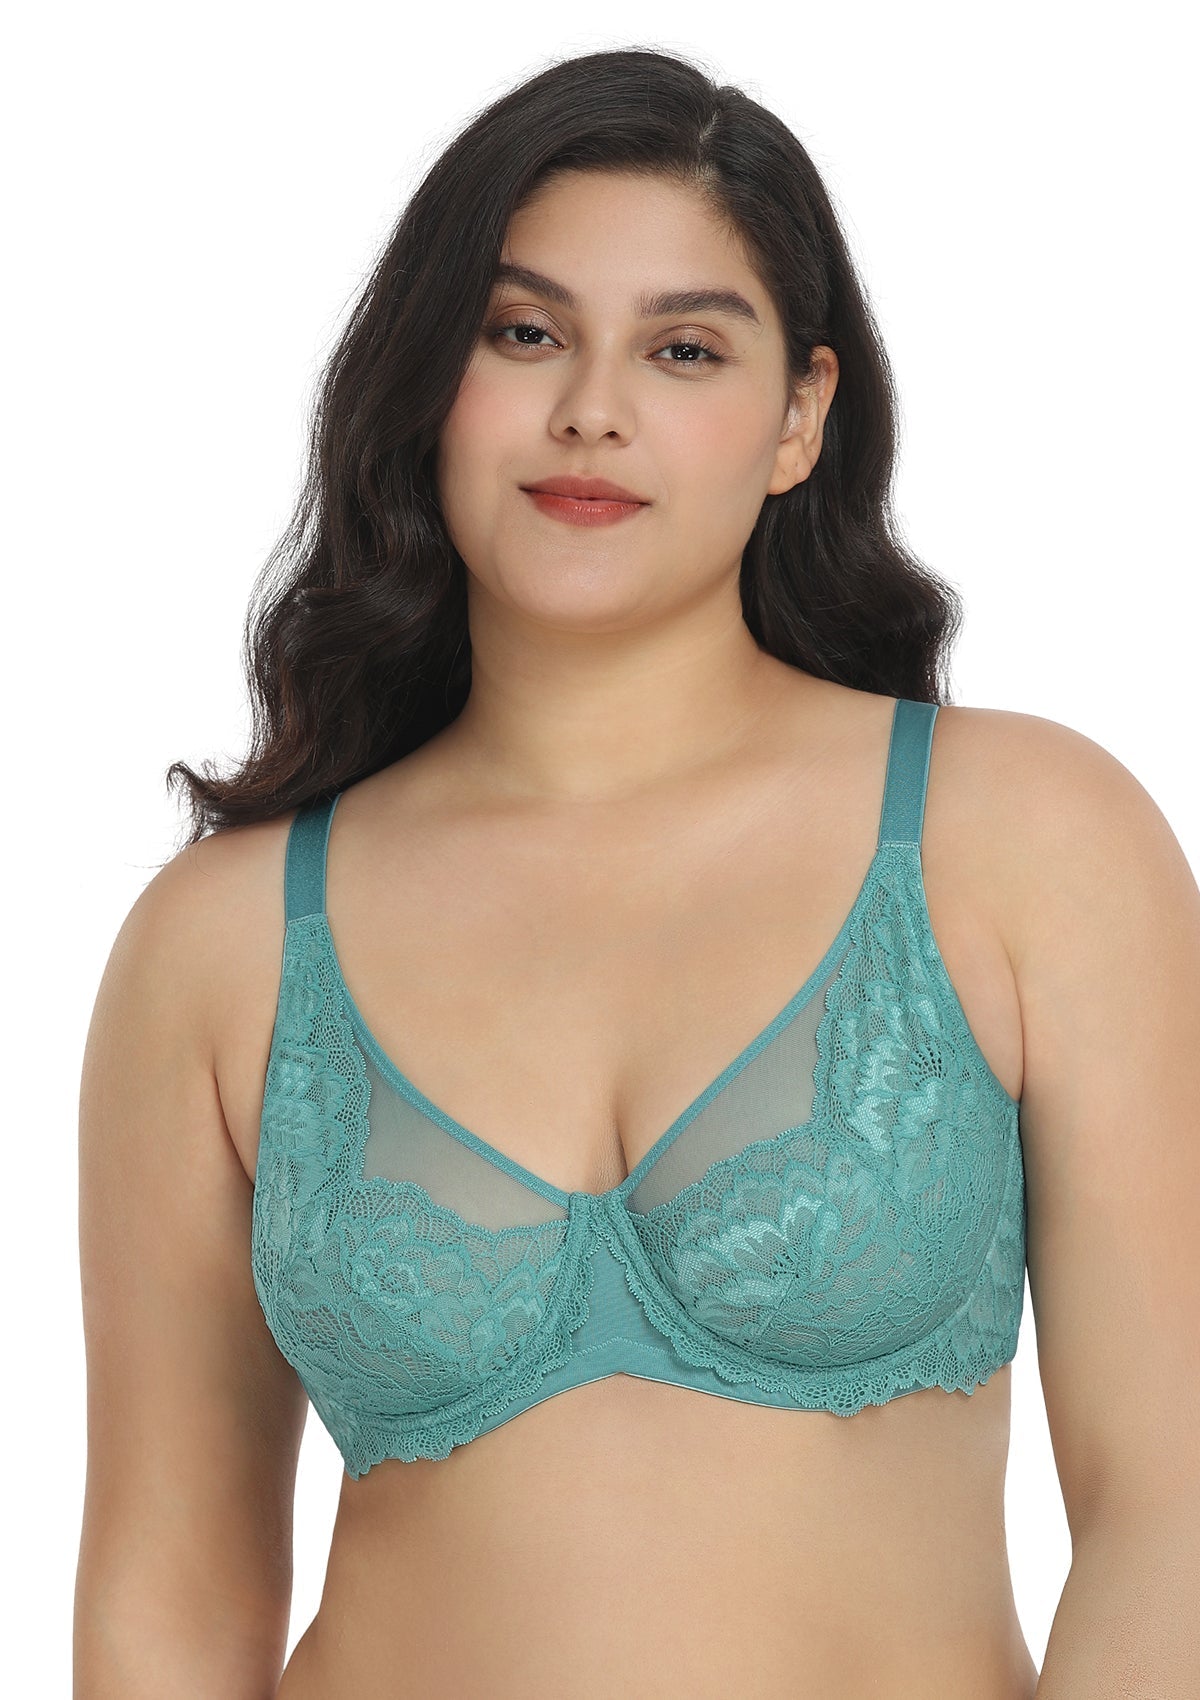 HSIA Paeonia Lace Full Coverage Underwire Non-Padded Uplifting Bra - Teal / 38 / DD/E